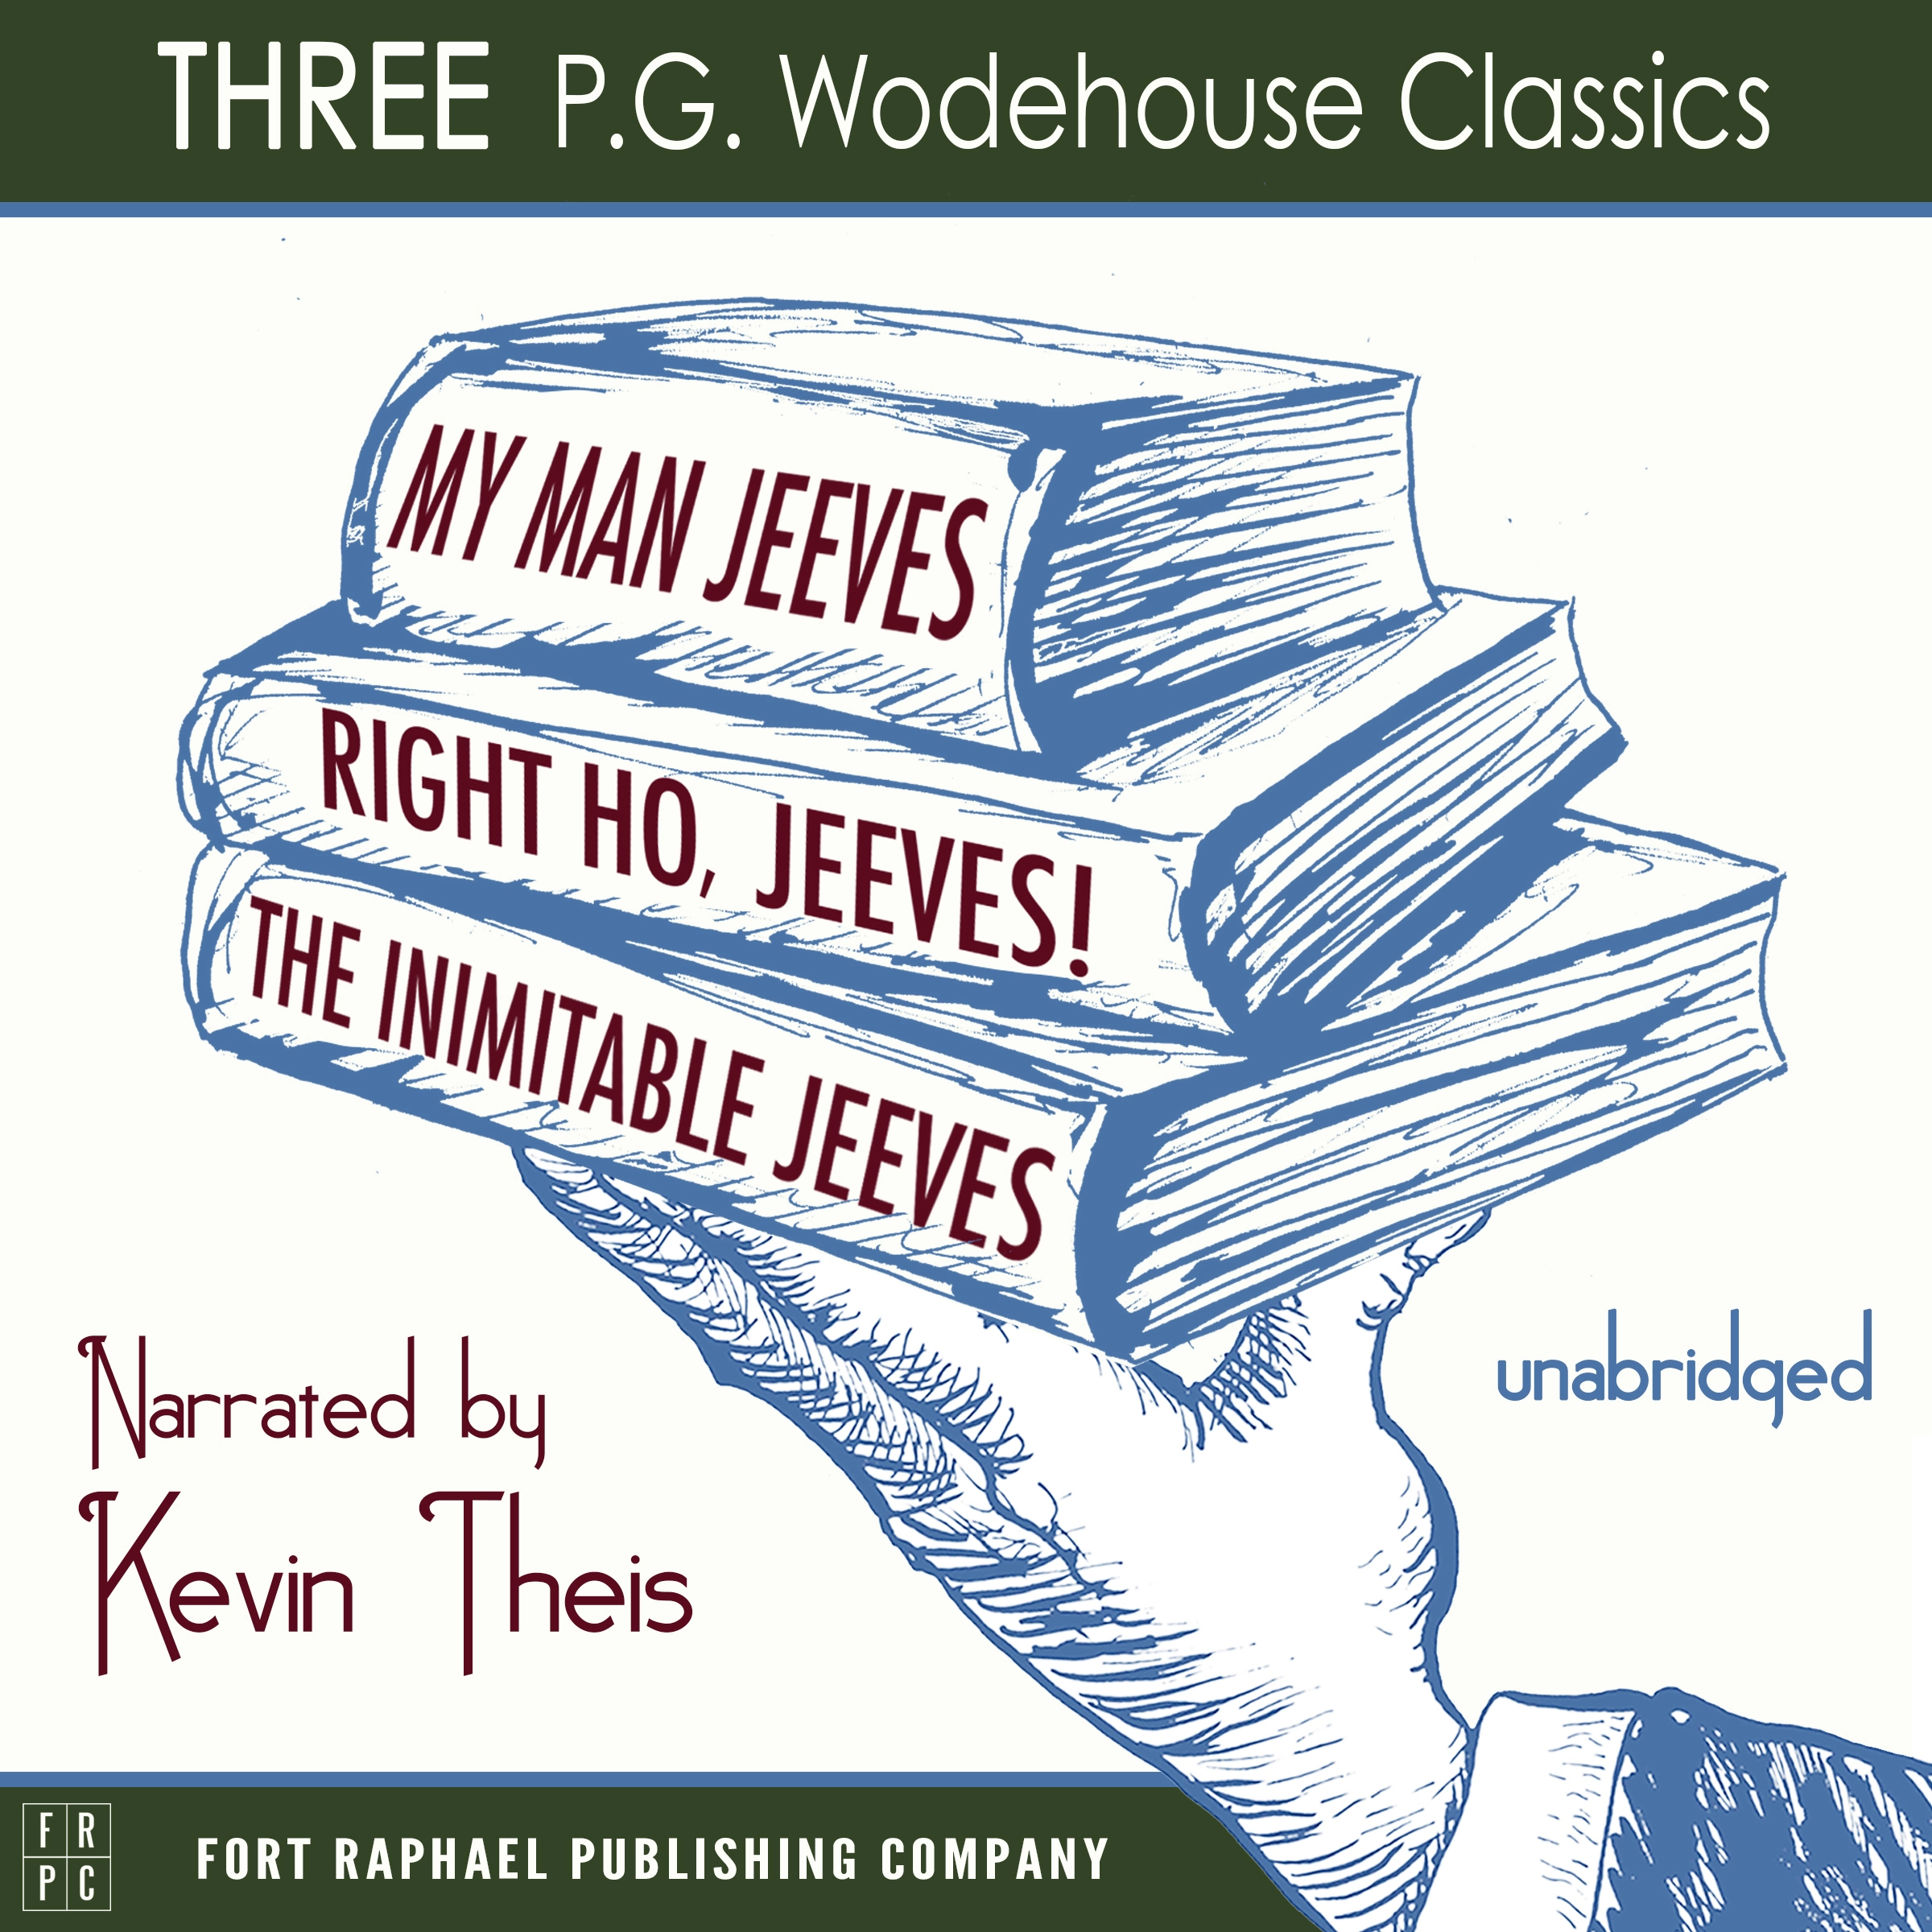 My Man, Jeeves, The Inimitable Jeeves and Right Ho, Jeeves - THREE P.G. Wodehouse Classics! - Unabridged by P.G. Wodehouse Audiobook